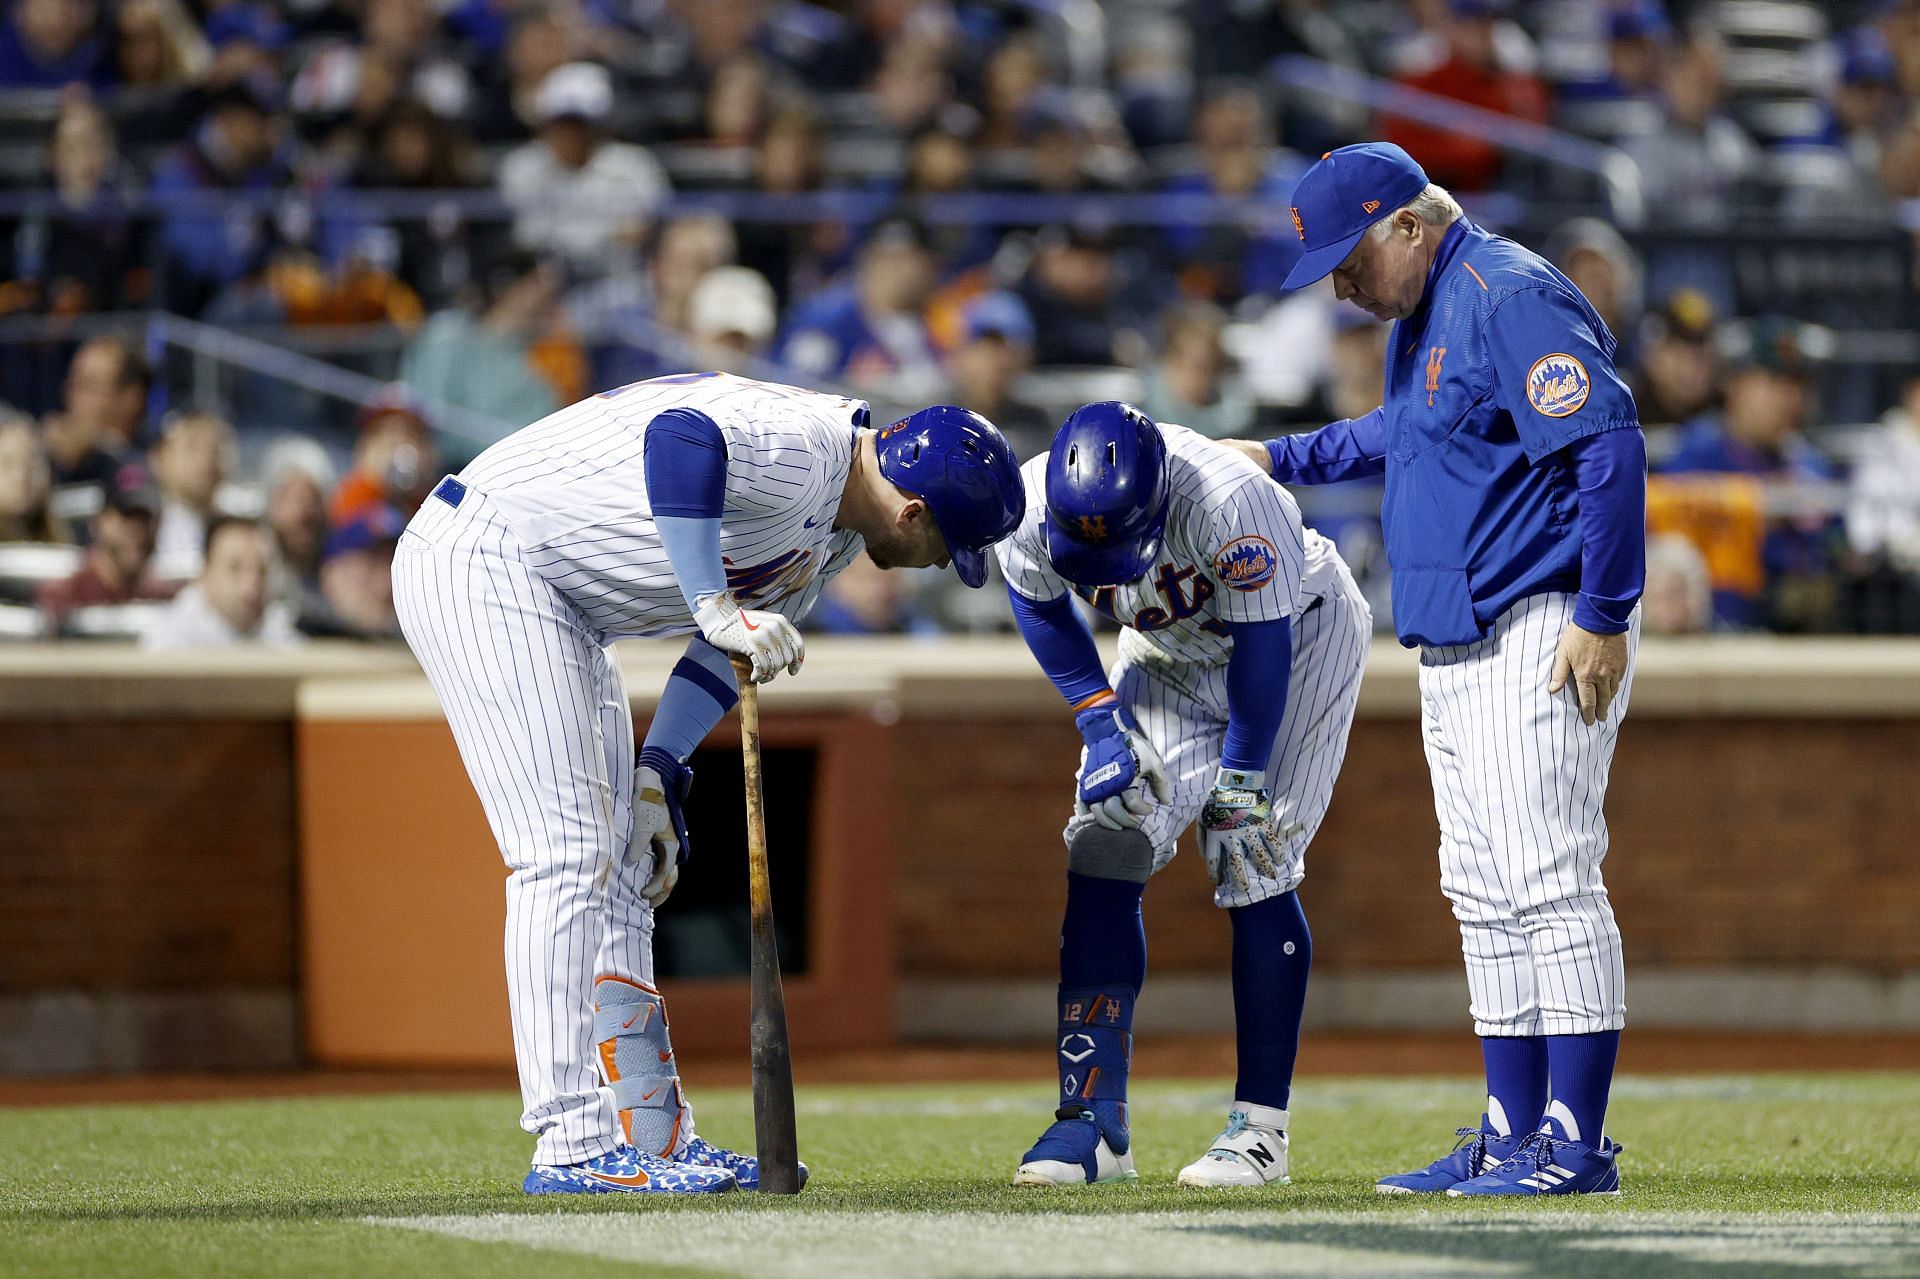 The New York Mets have the highest payroll in baseball